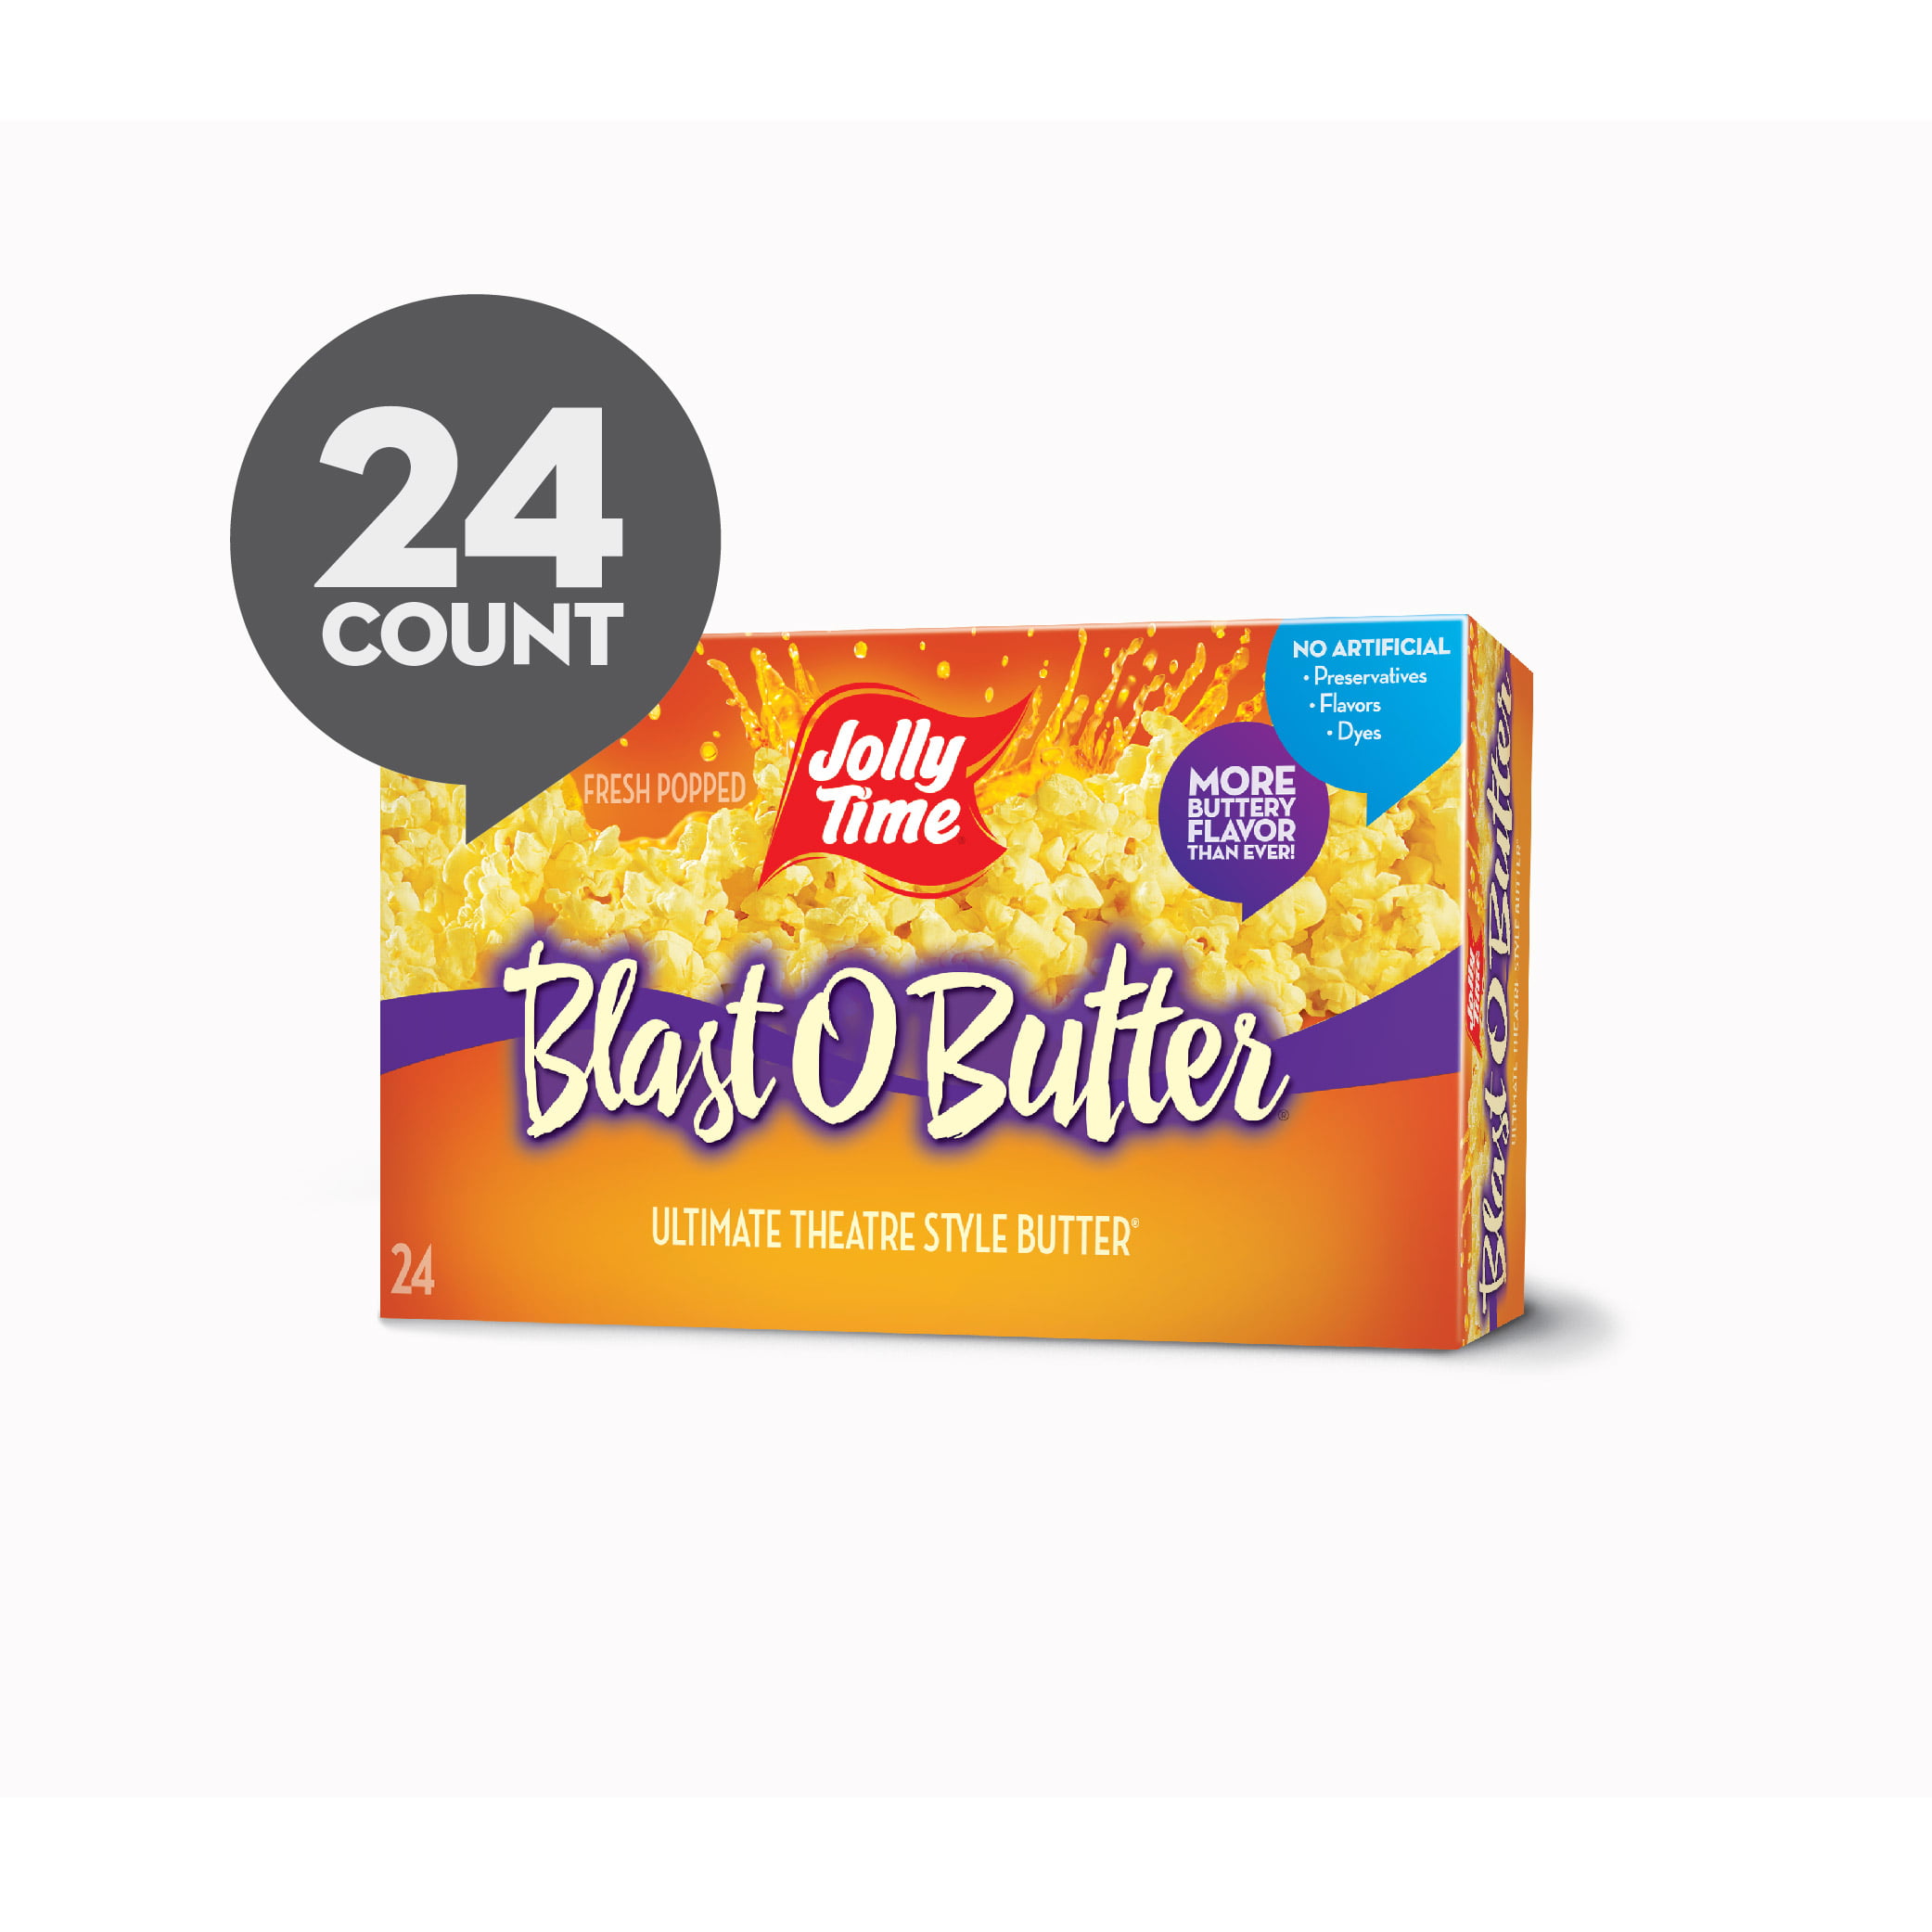 JOLLY TIME Blast O Butter Microwave Popcorn, 24 Ct (3.2 Oz. Bags)